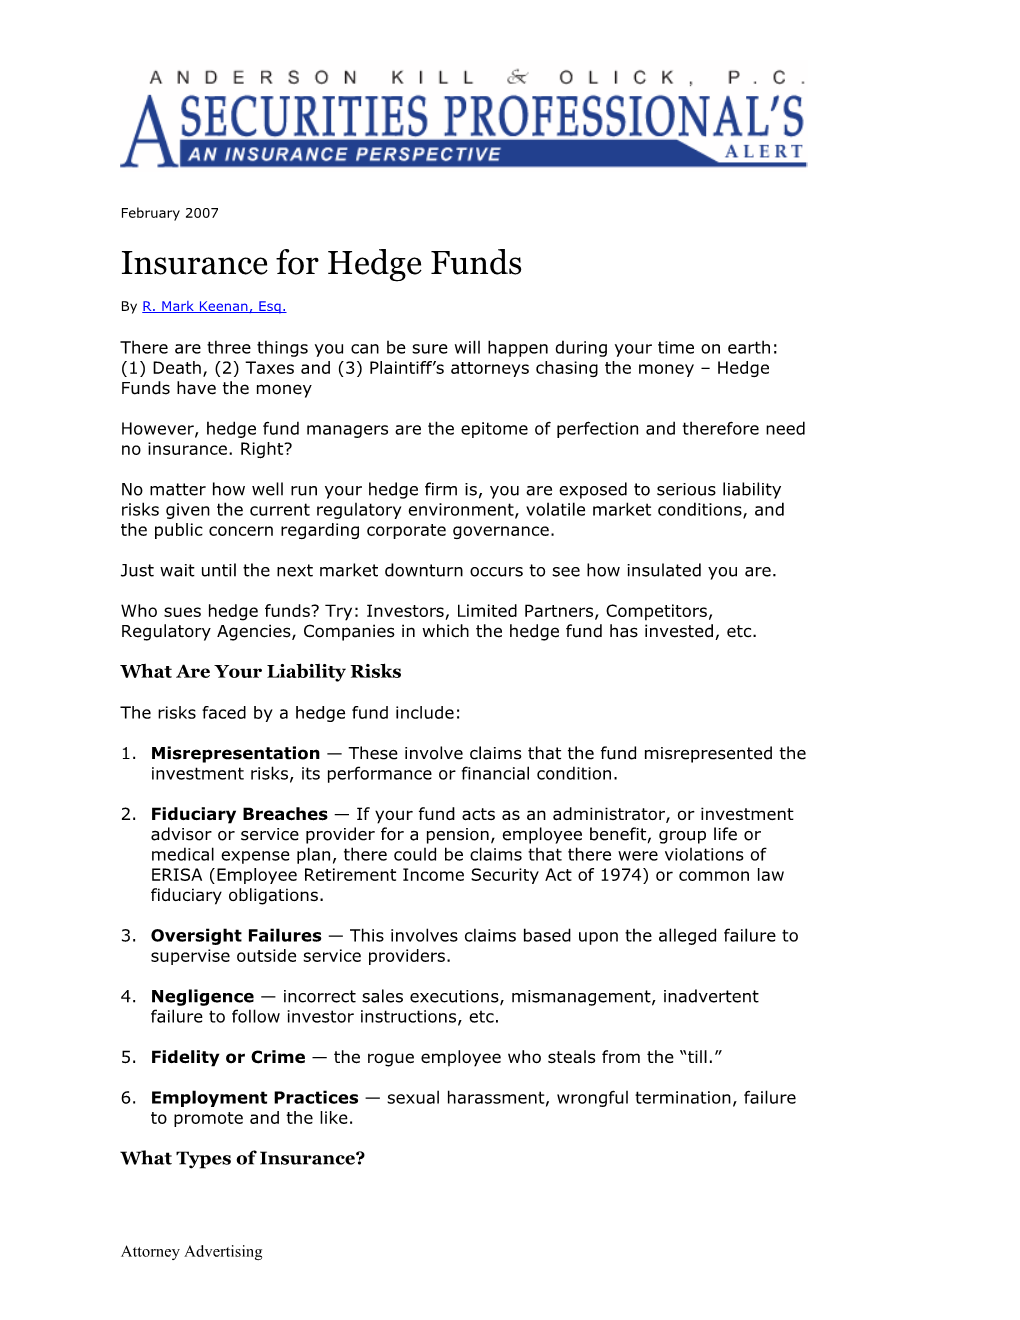 Insurance for Hedge Funds